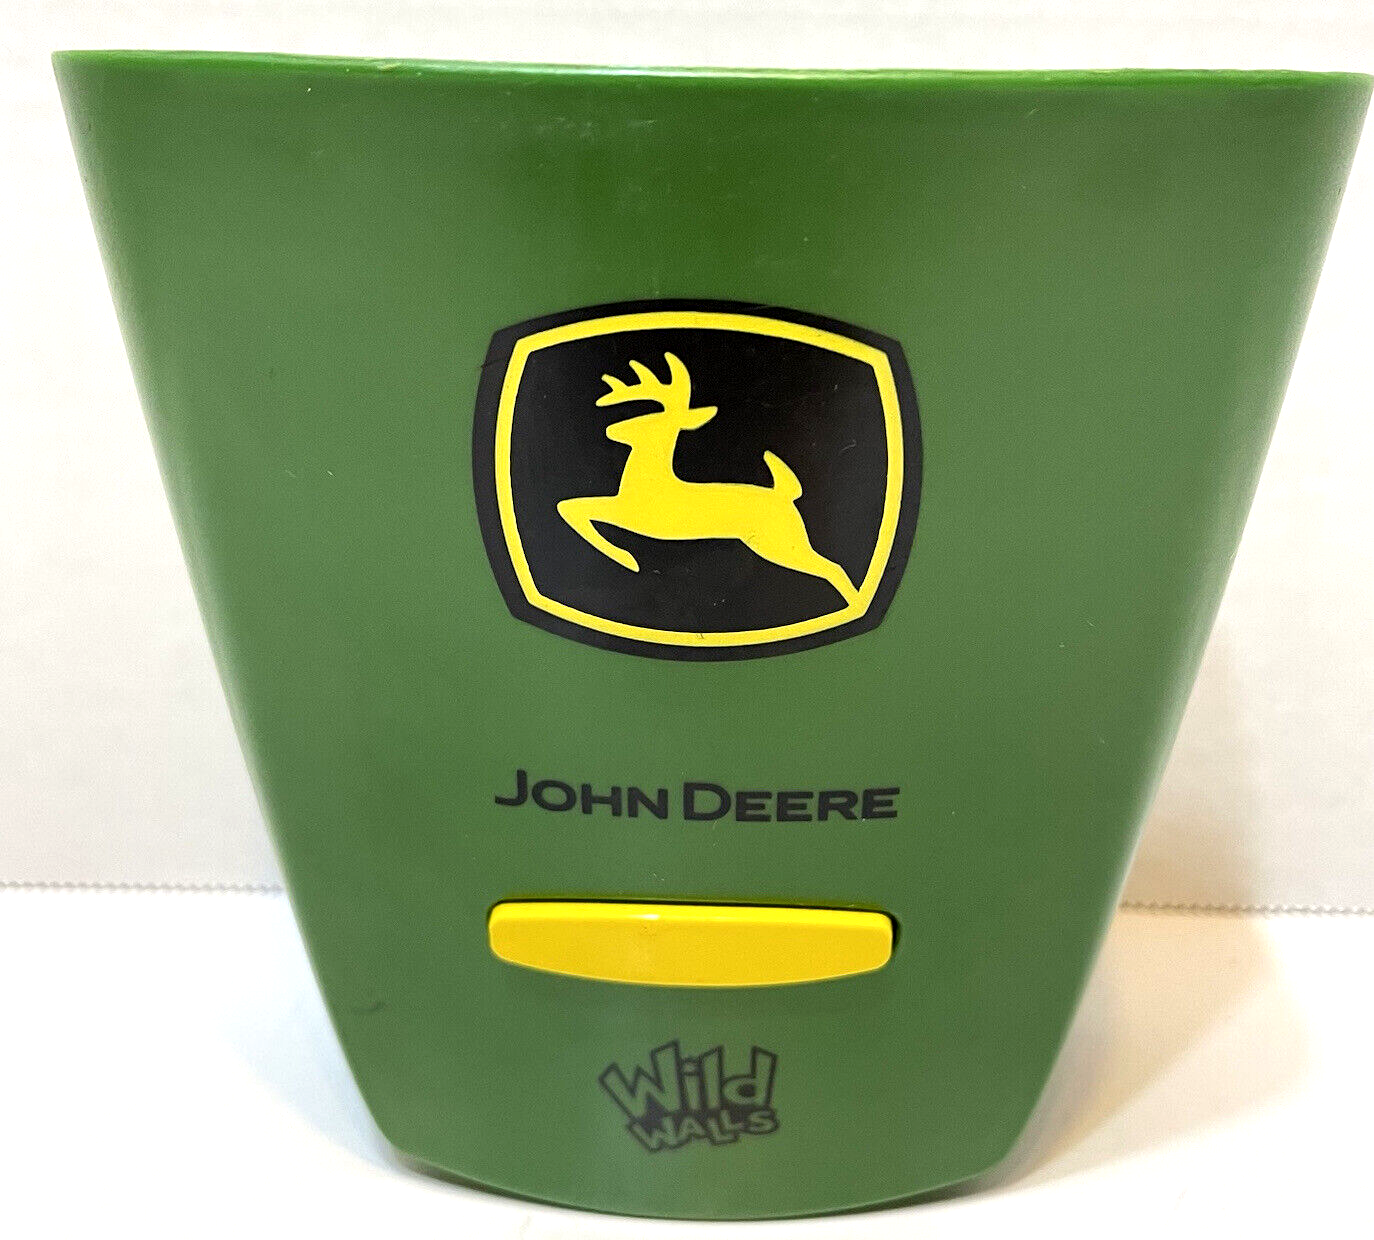 Primary image for John Deere Wild Walls Farm In My Room Light and Animal Sounds Tested Working